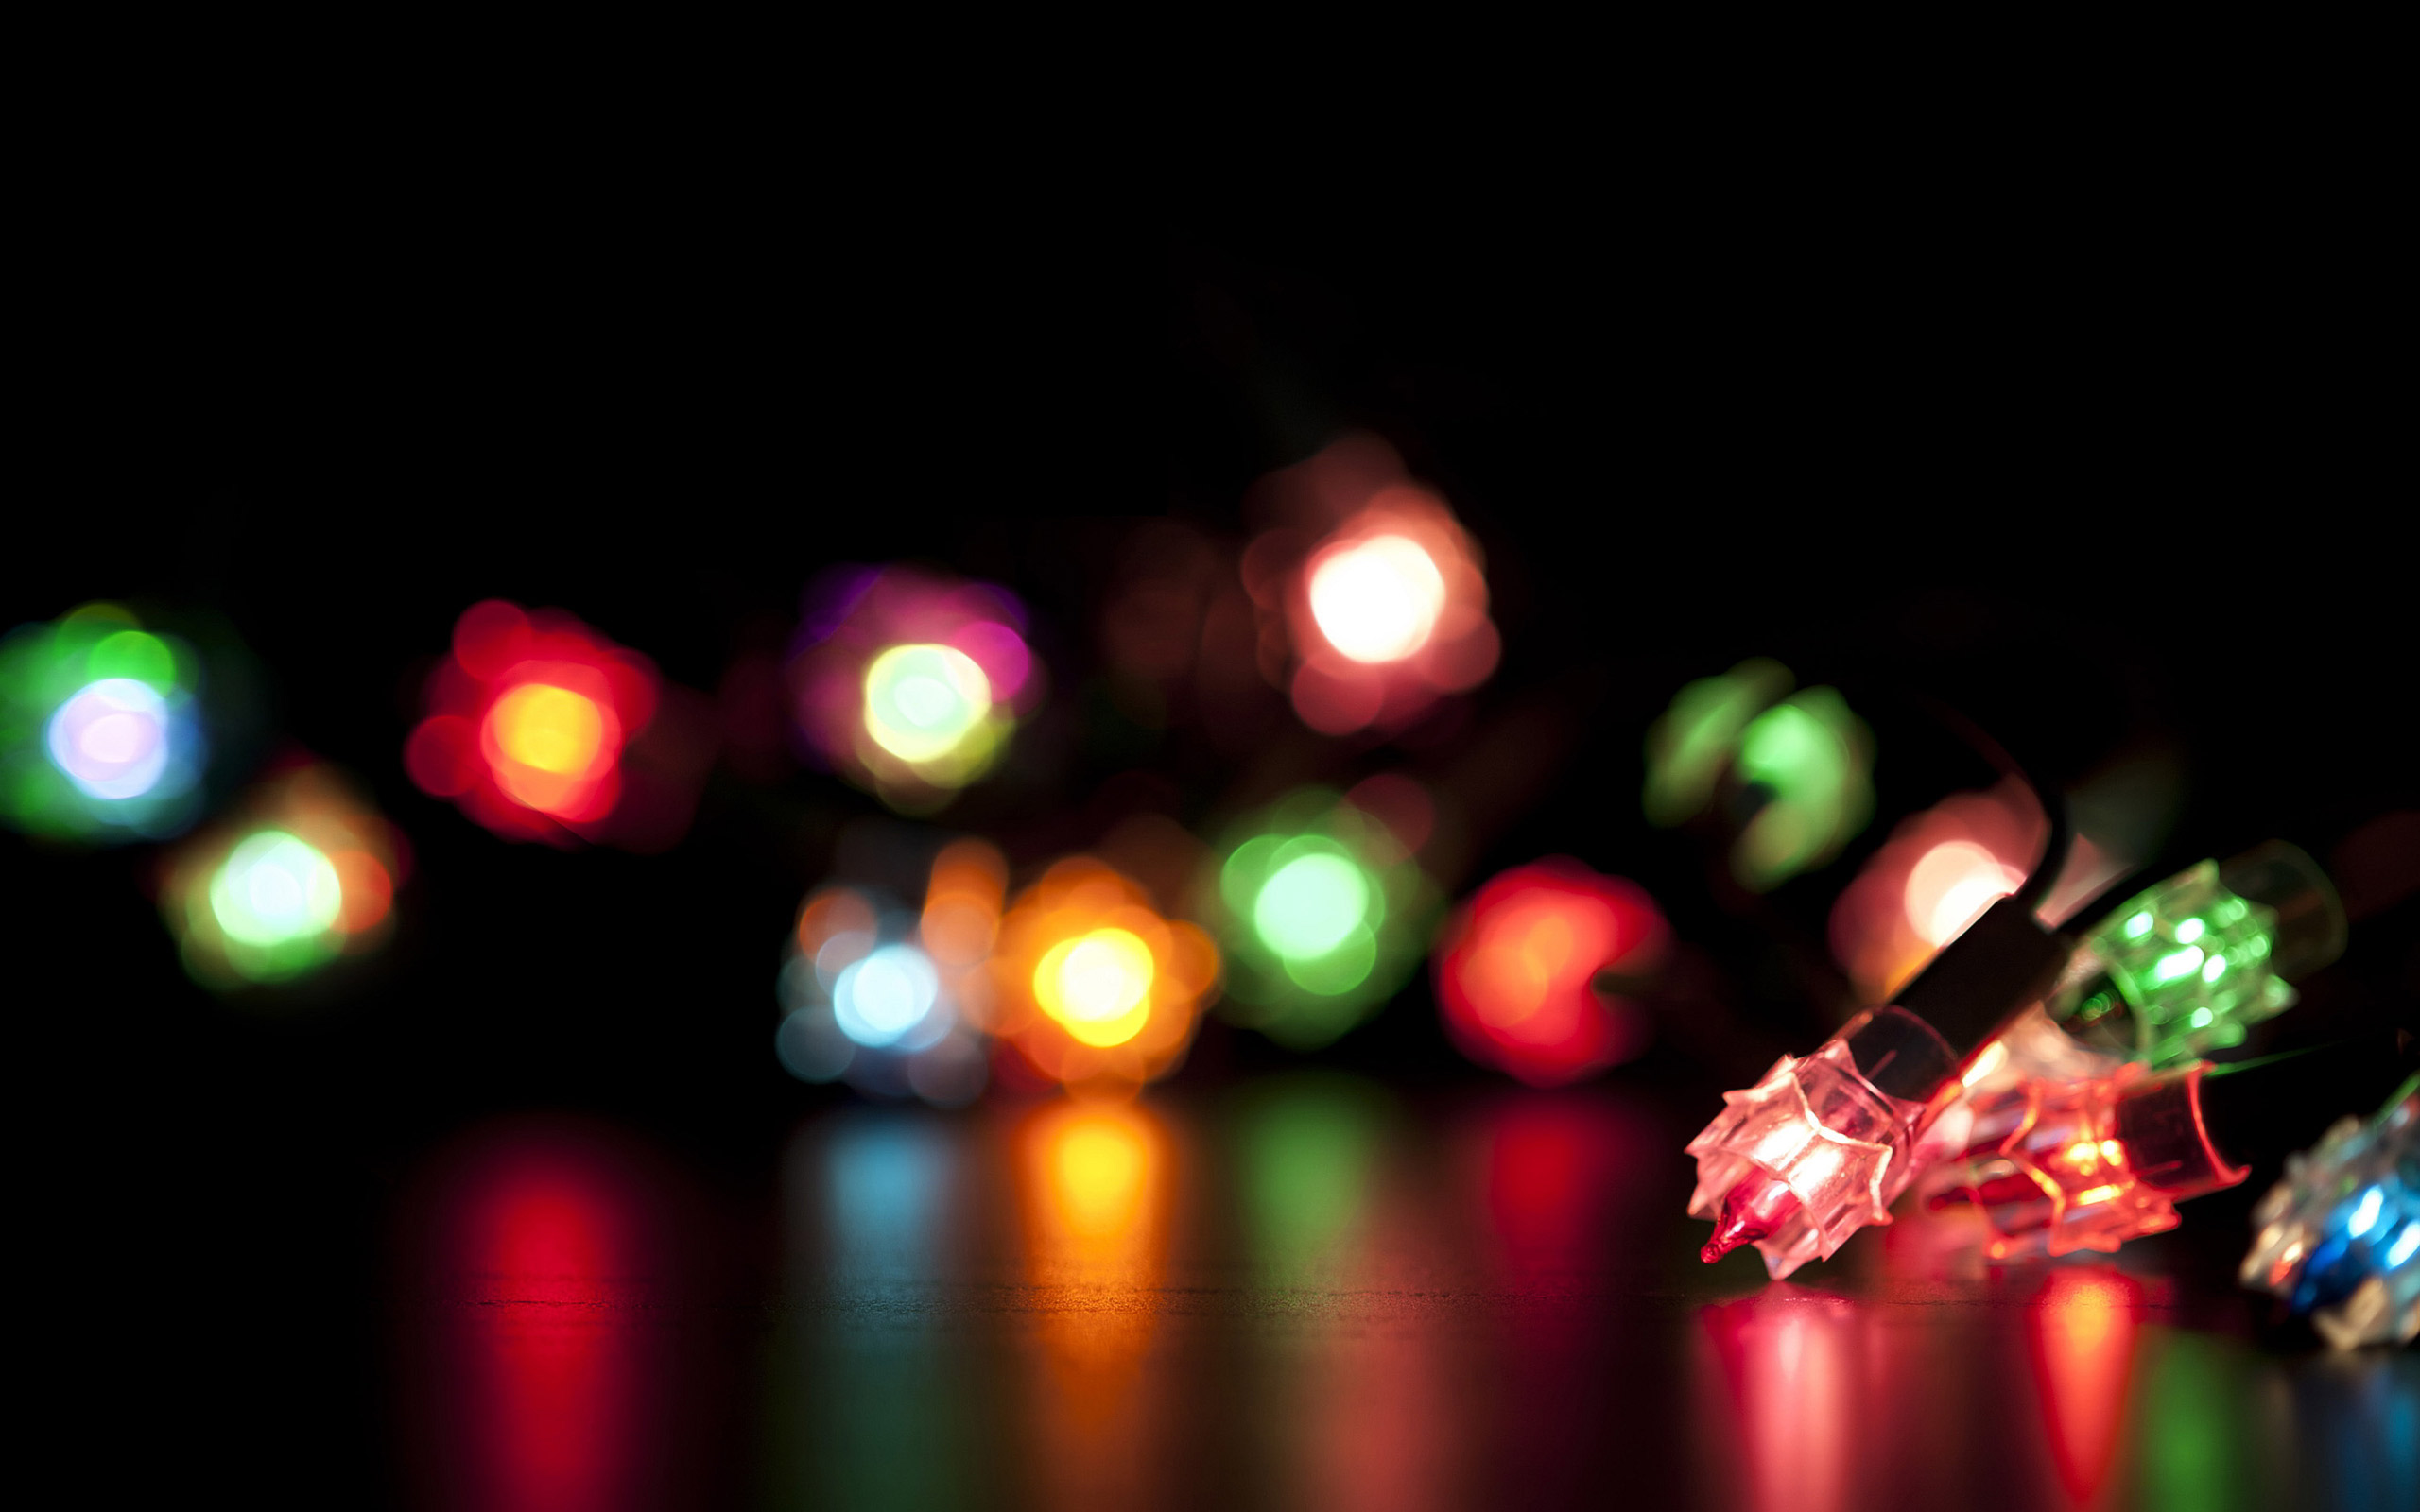 blurred night christmas lights background photos download